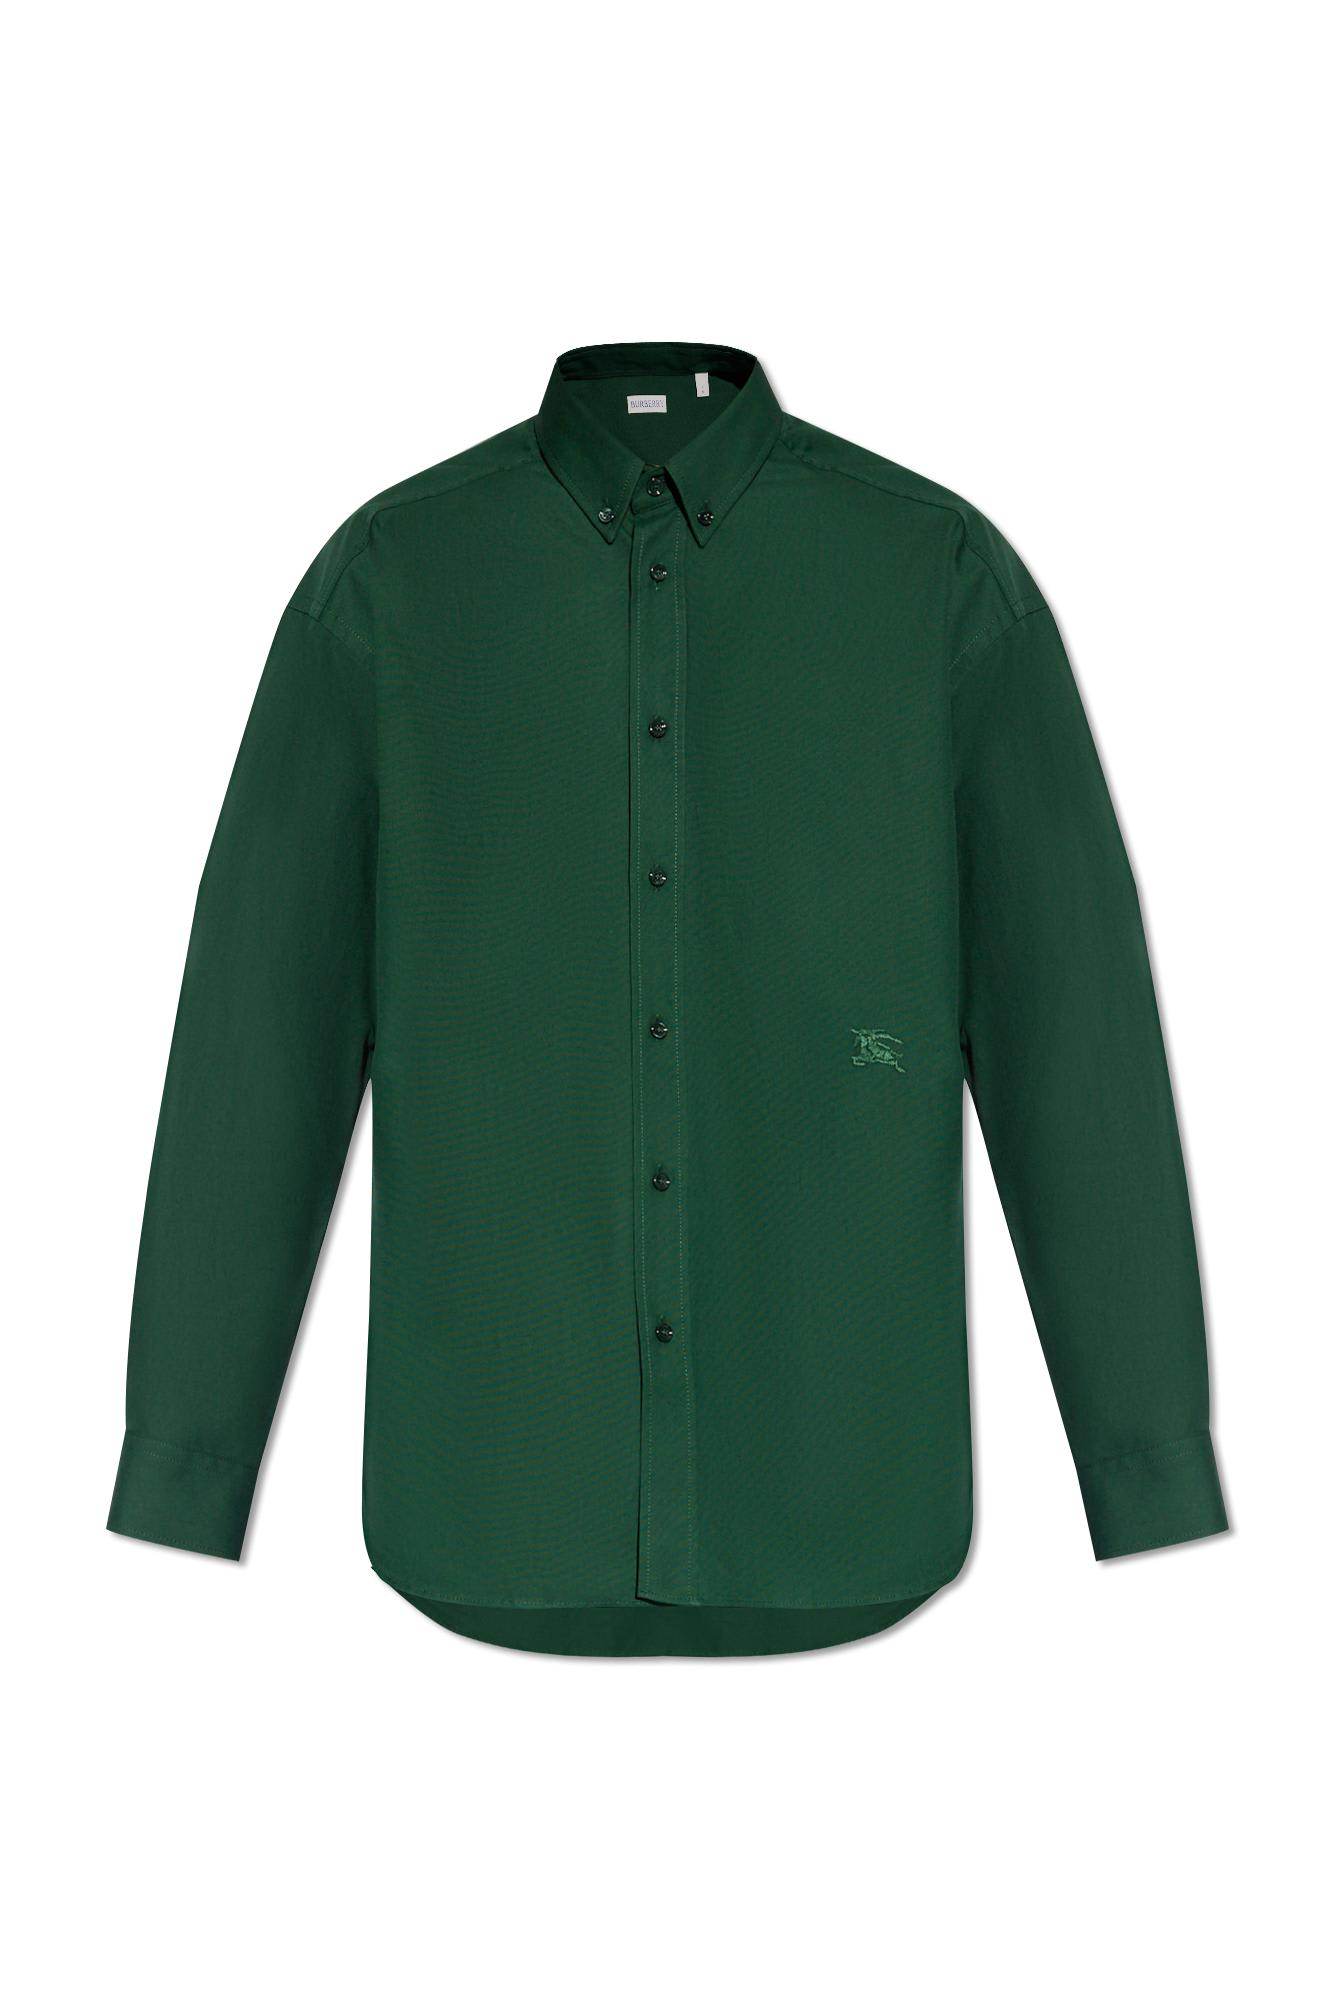 Burberry Embroidered Shirt In Green